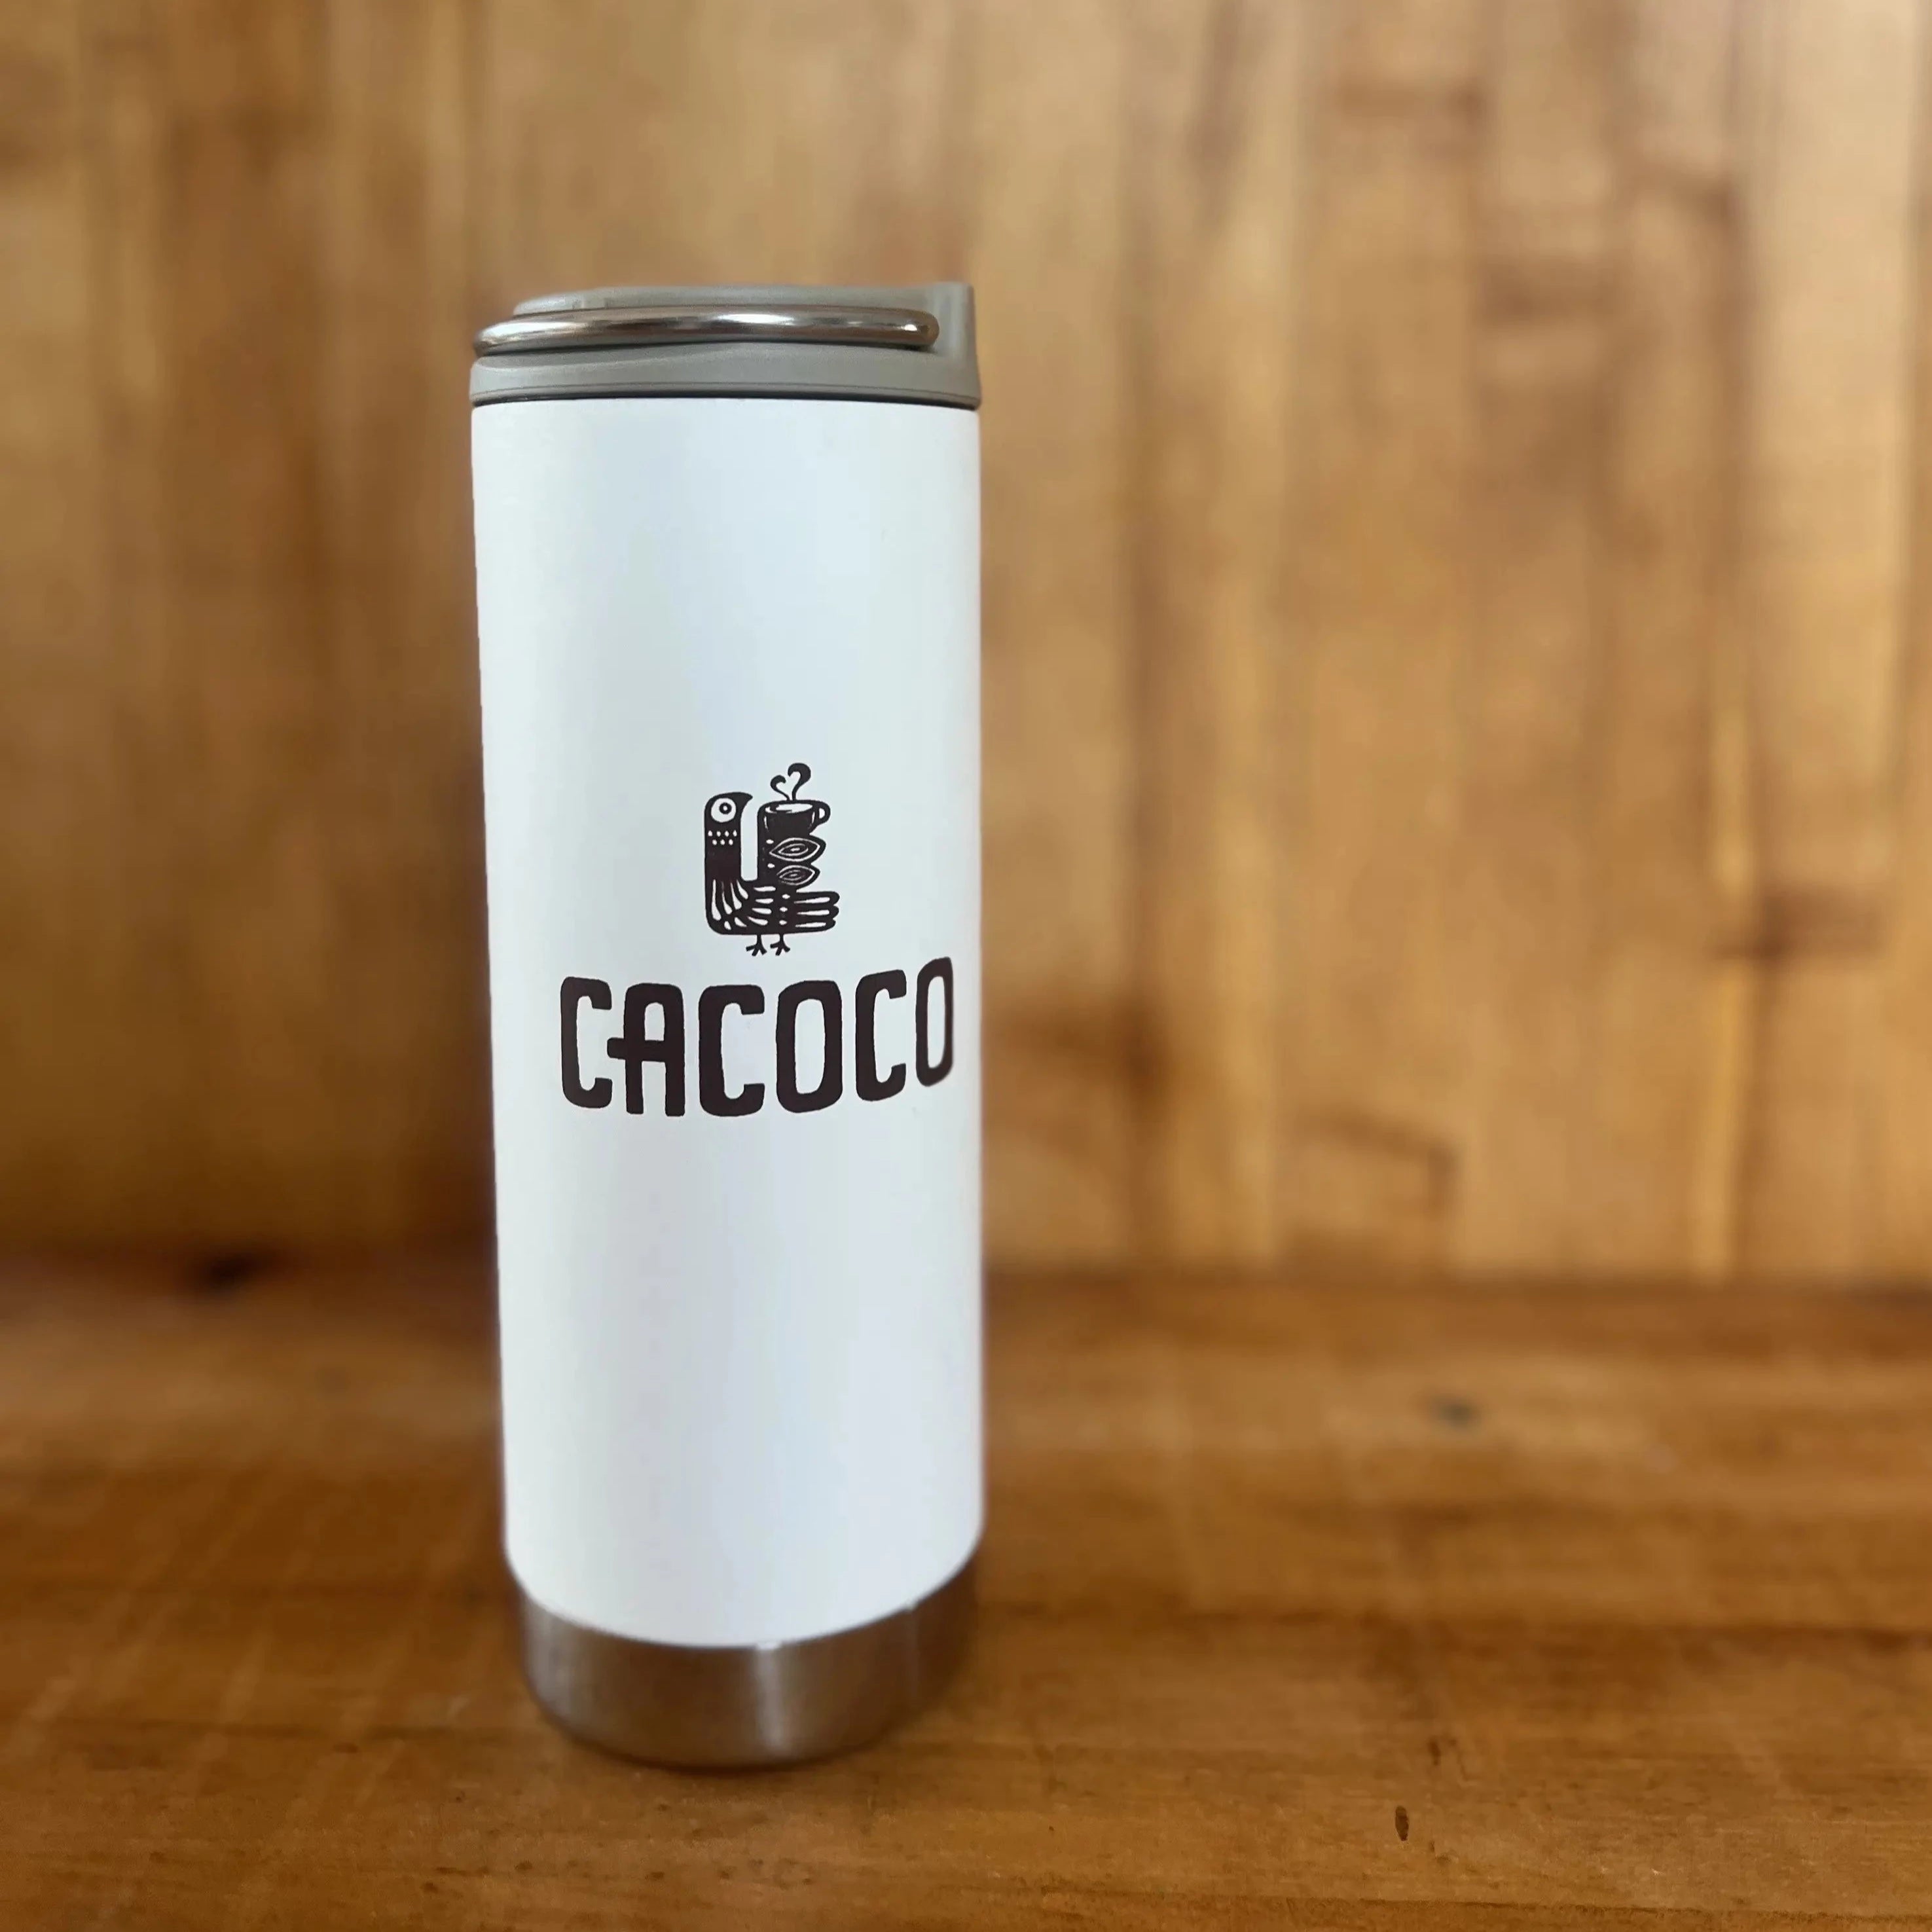 CACOCO Insulated Tumbler from Klean Kanteen